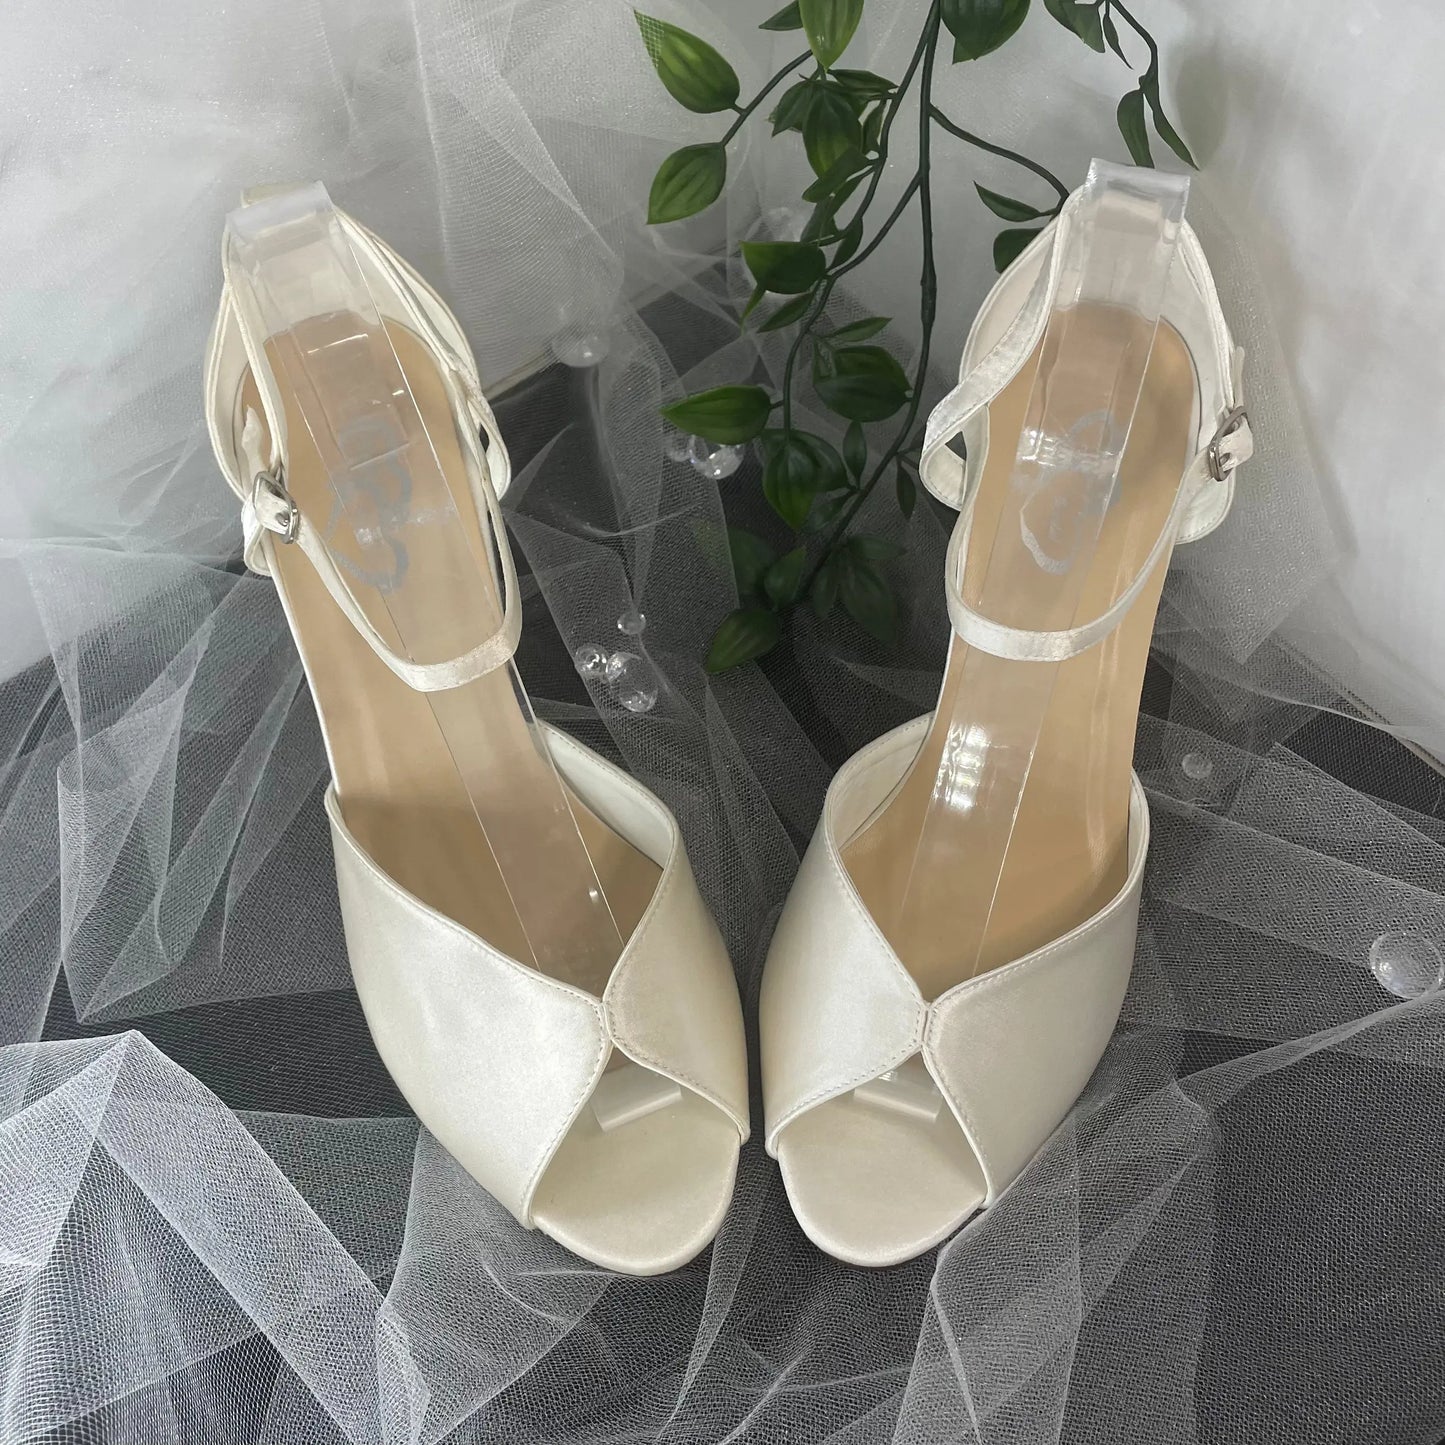 Remi satin bridal shoe with elegant crossover ankle strap.